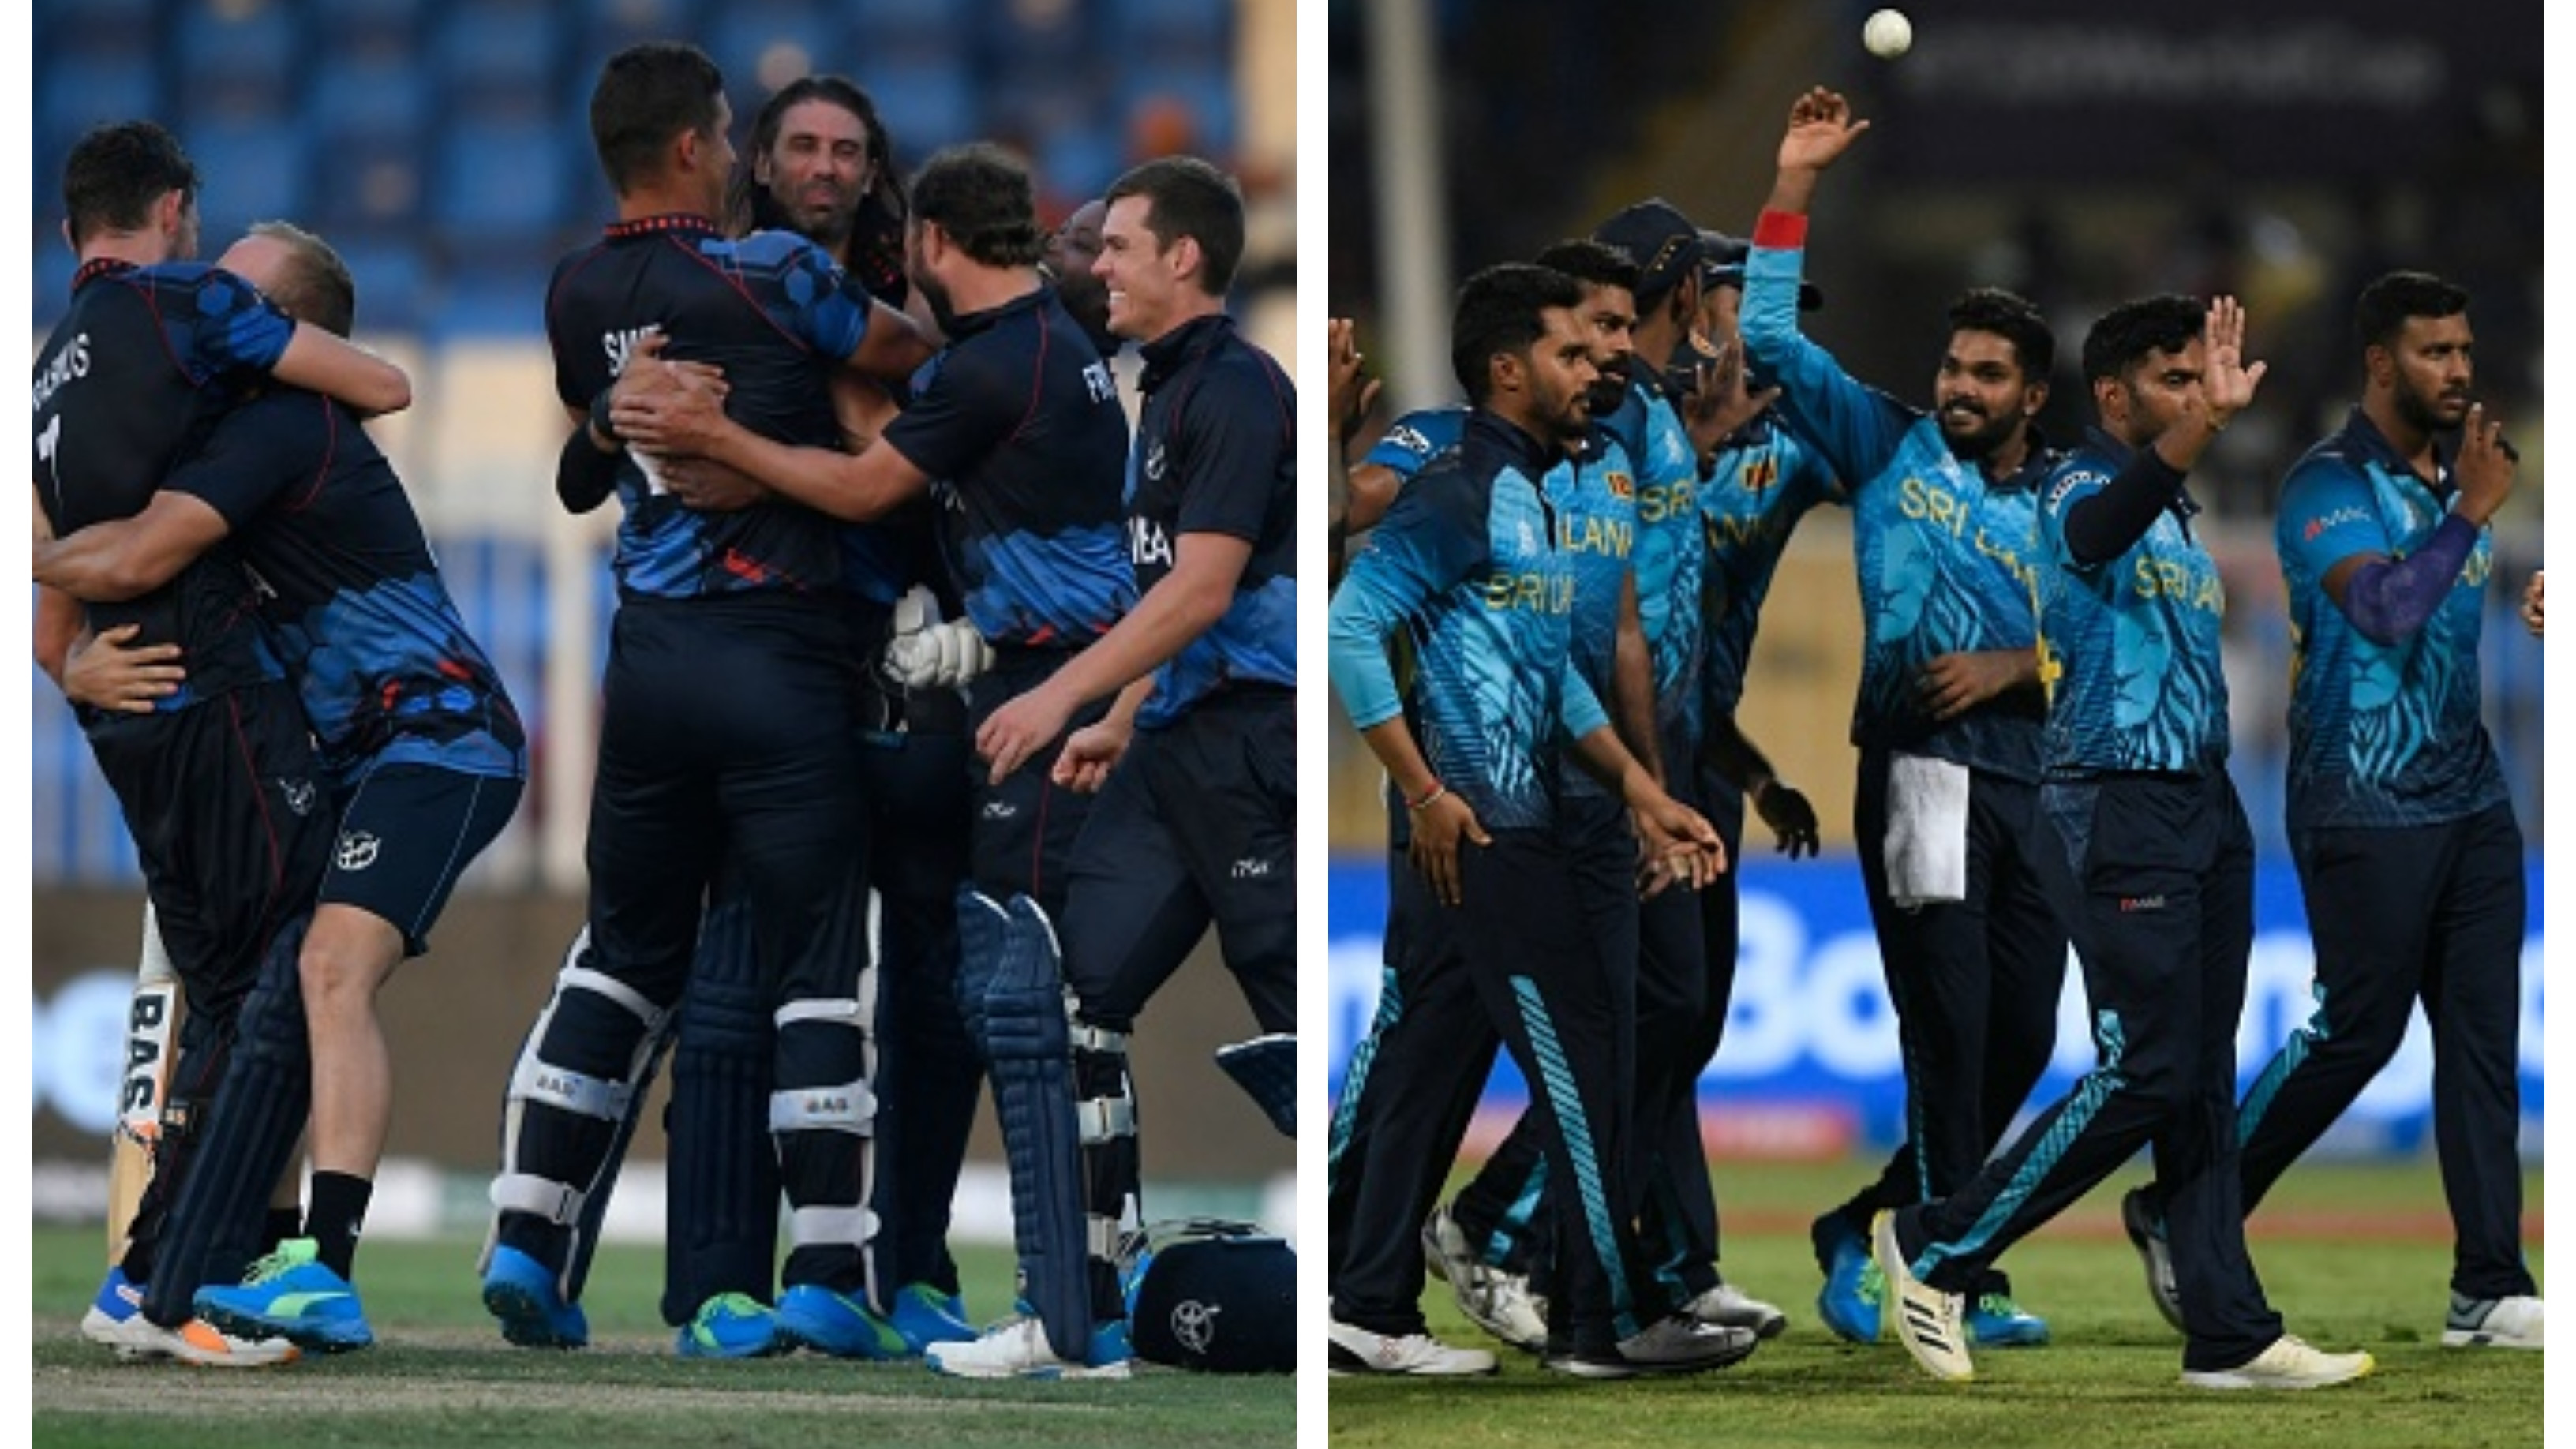 T20 World Cup 2021: Namibia enter Super 12 with 8-wicket win over Ireland; Sri Lanka bowl out Netherlands for 44